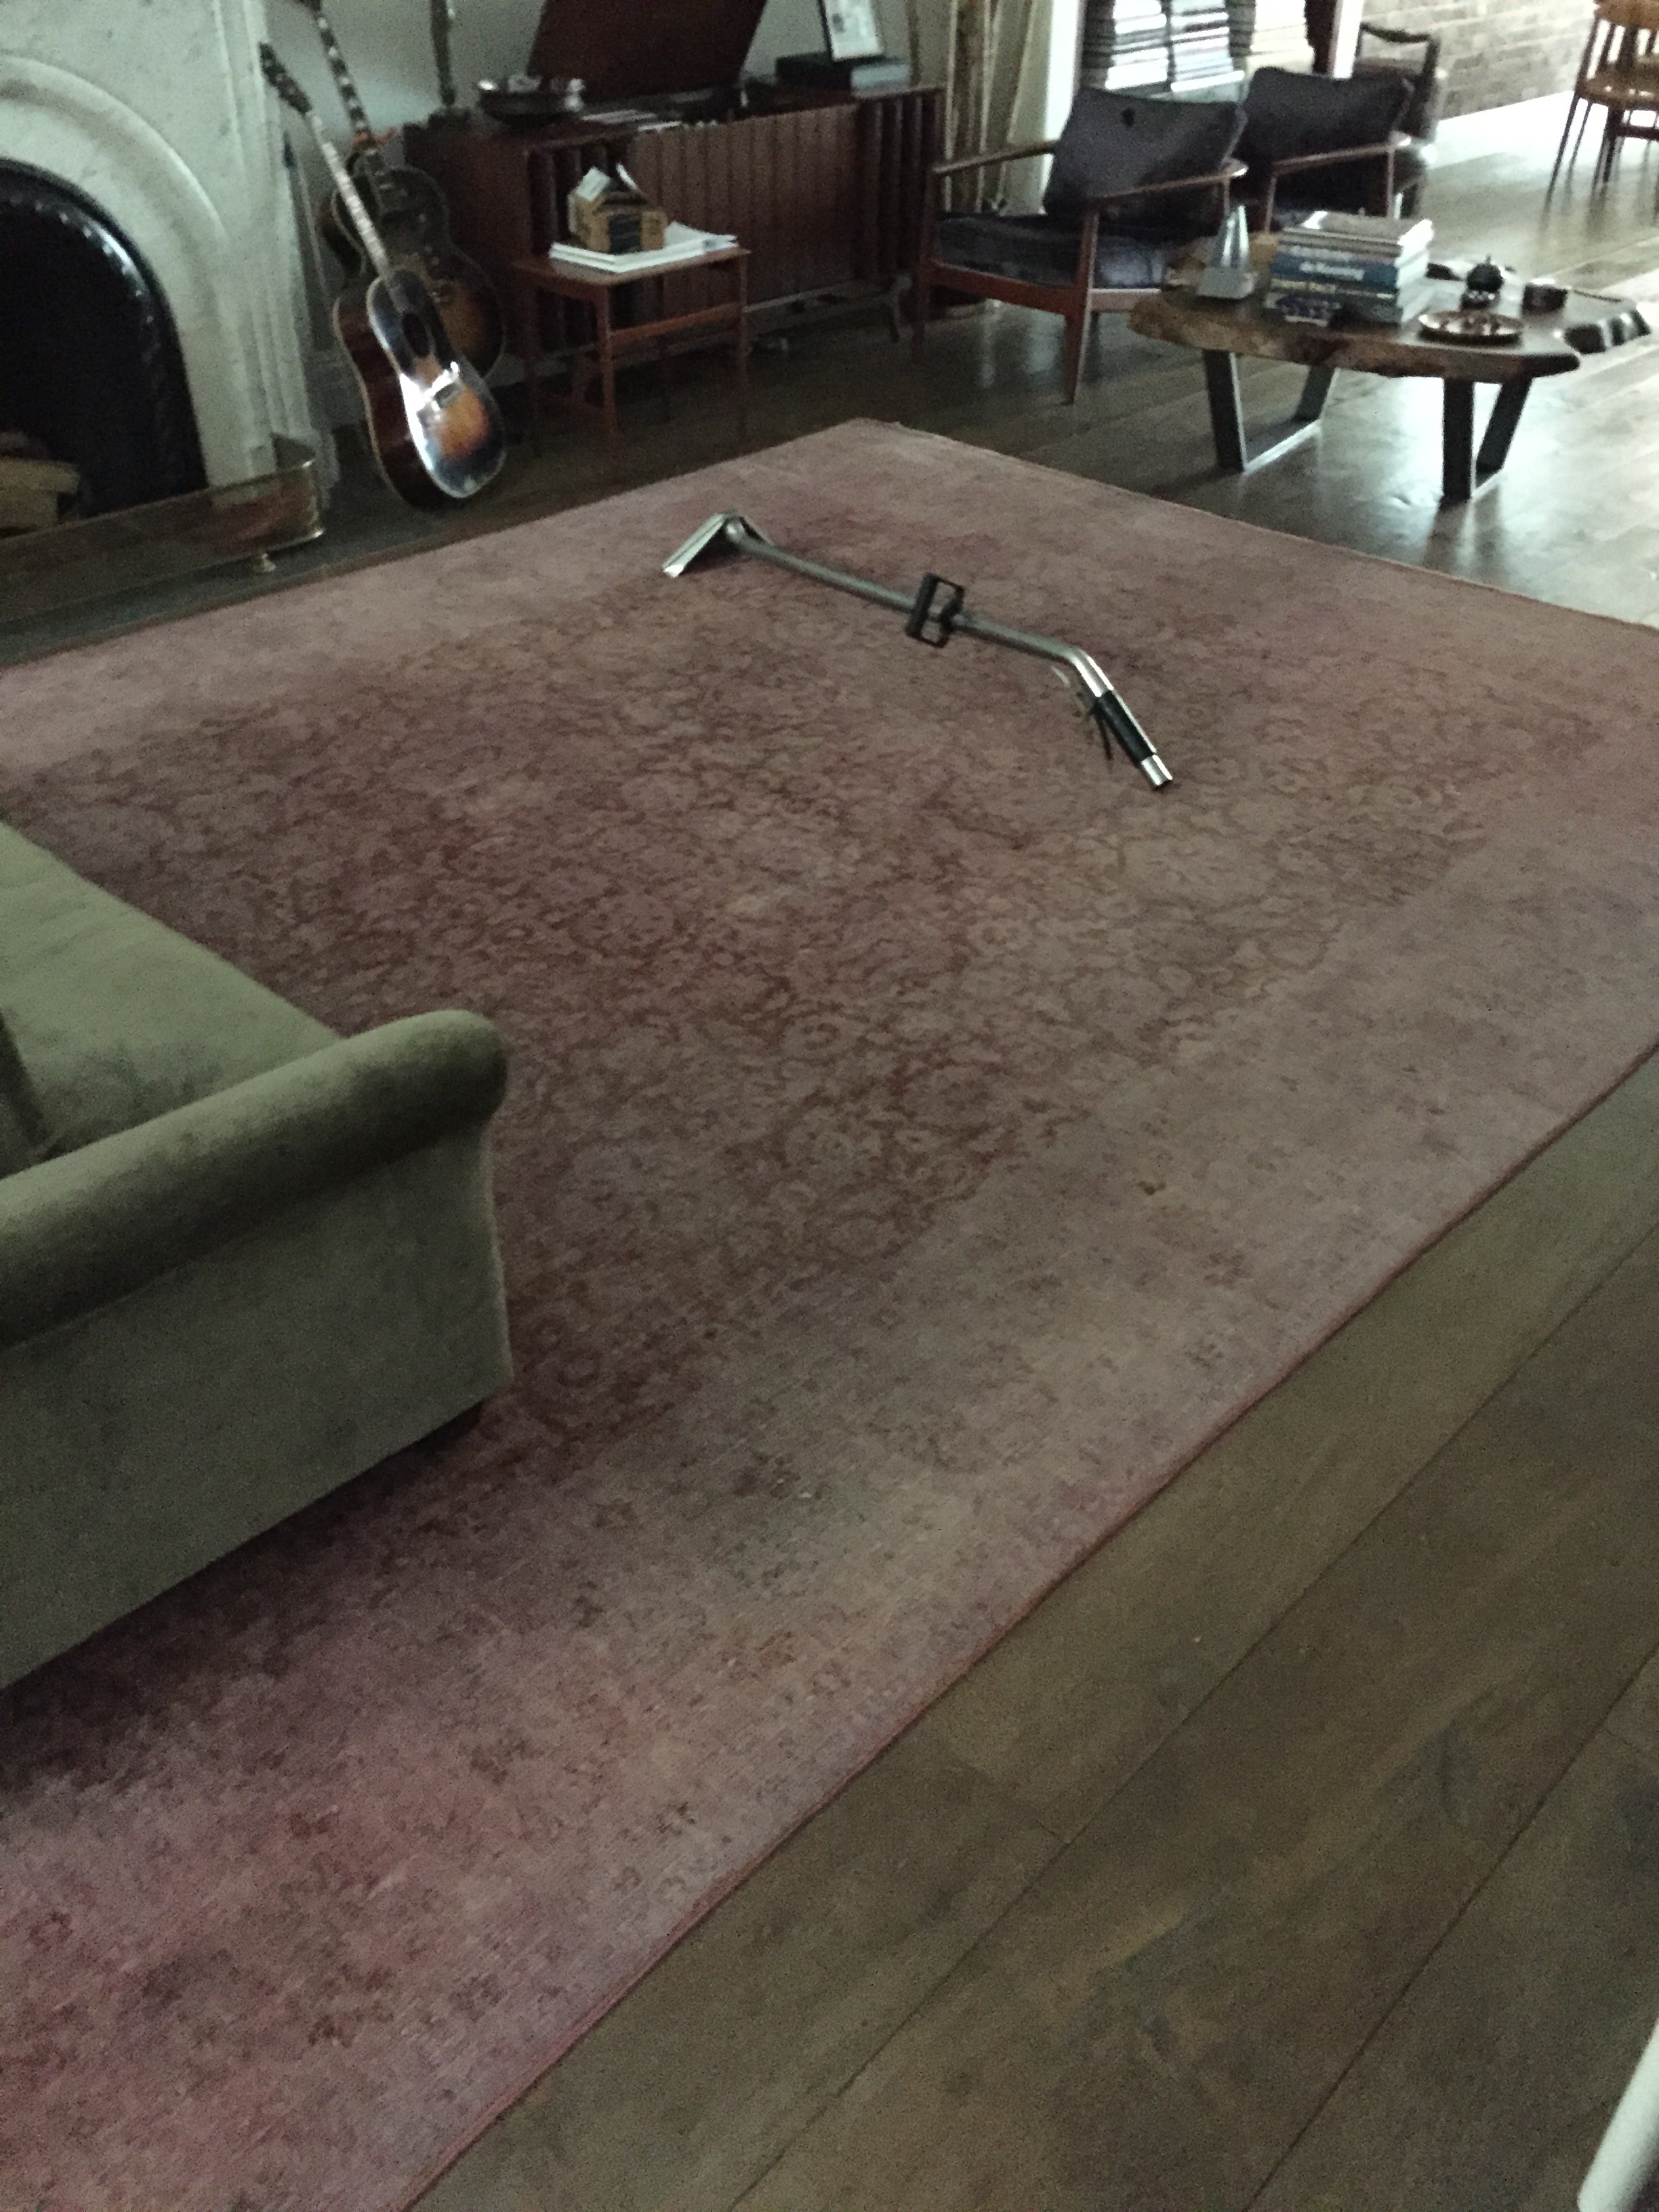 RUG CLEANING IN NYC